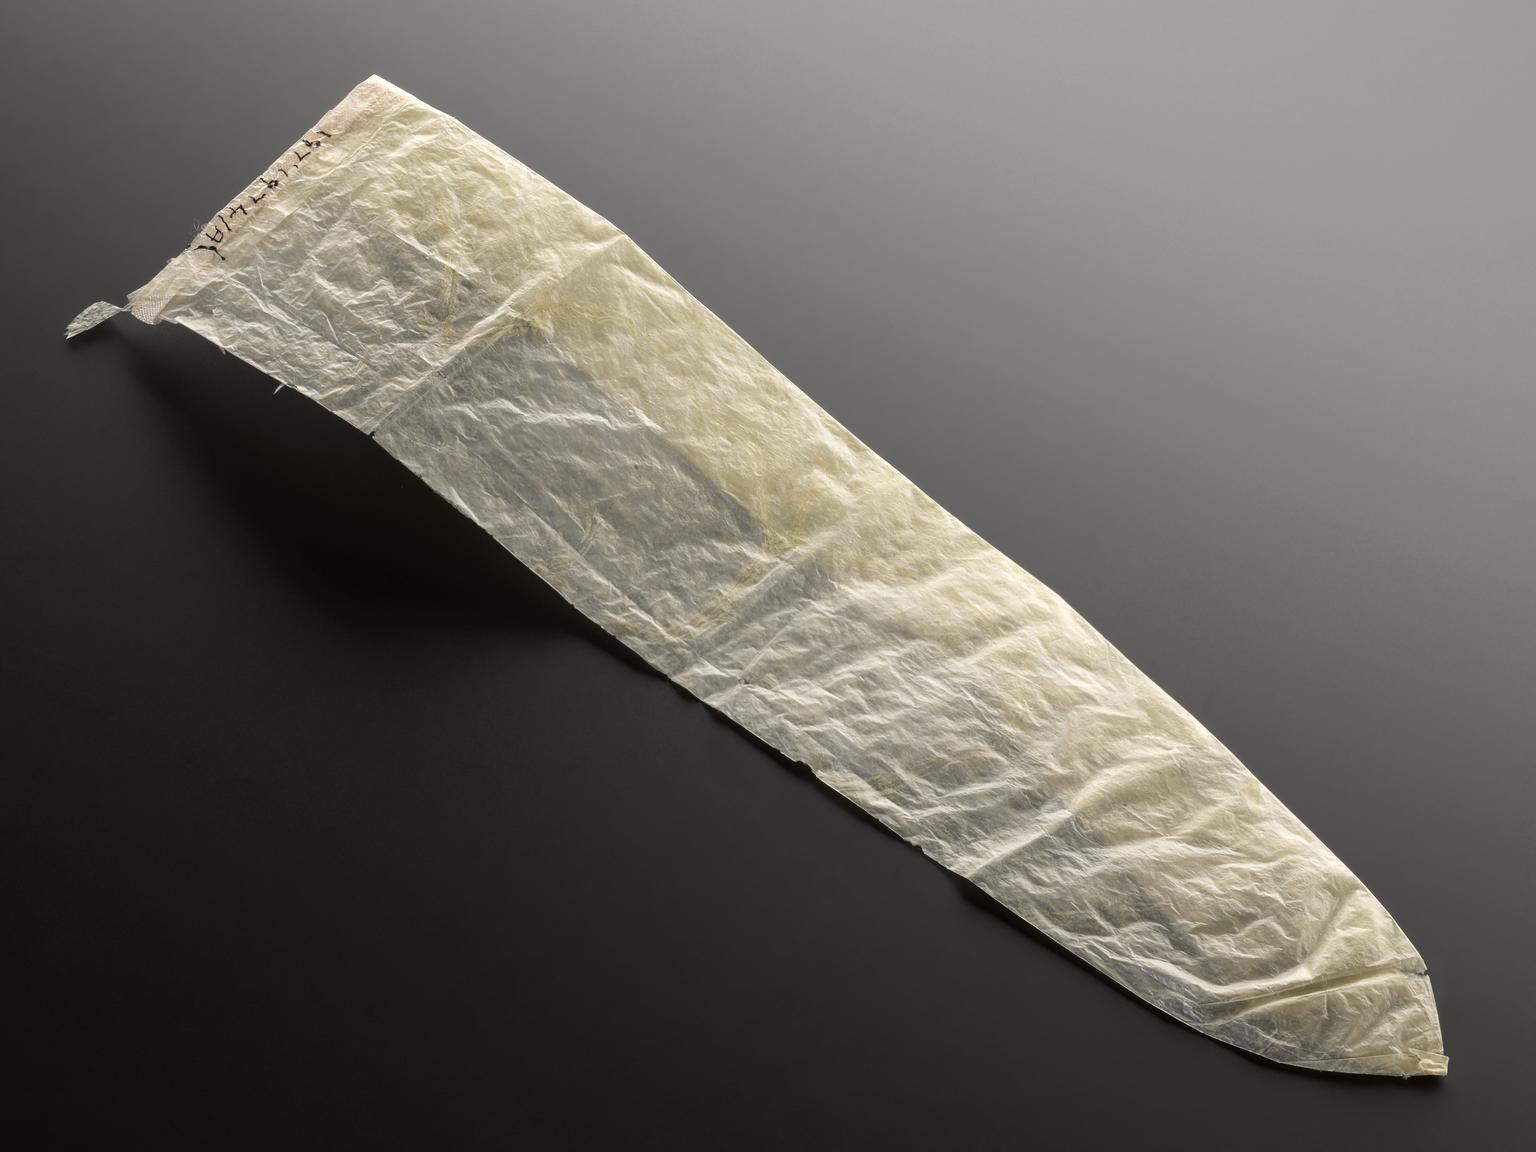 Science Museum on Twitter: "@LeedsMuseums We hope you weren't being raunchy  with that aubergine! Stay safe and appreciate modern contraceptive  technology. In the early 1900s condoms were made from animal guts!  https://t.co/z1mAEr3yyu